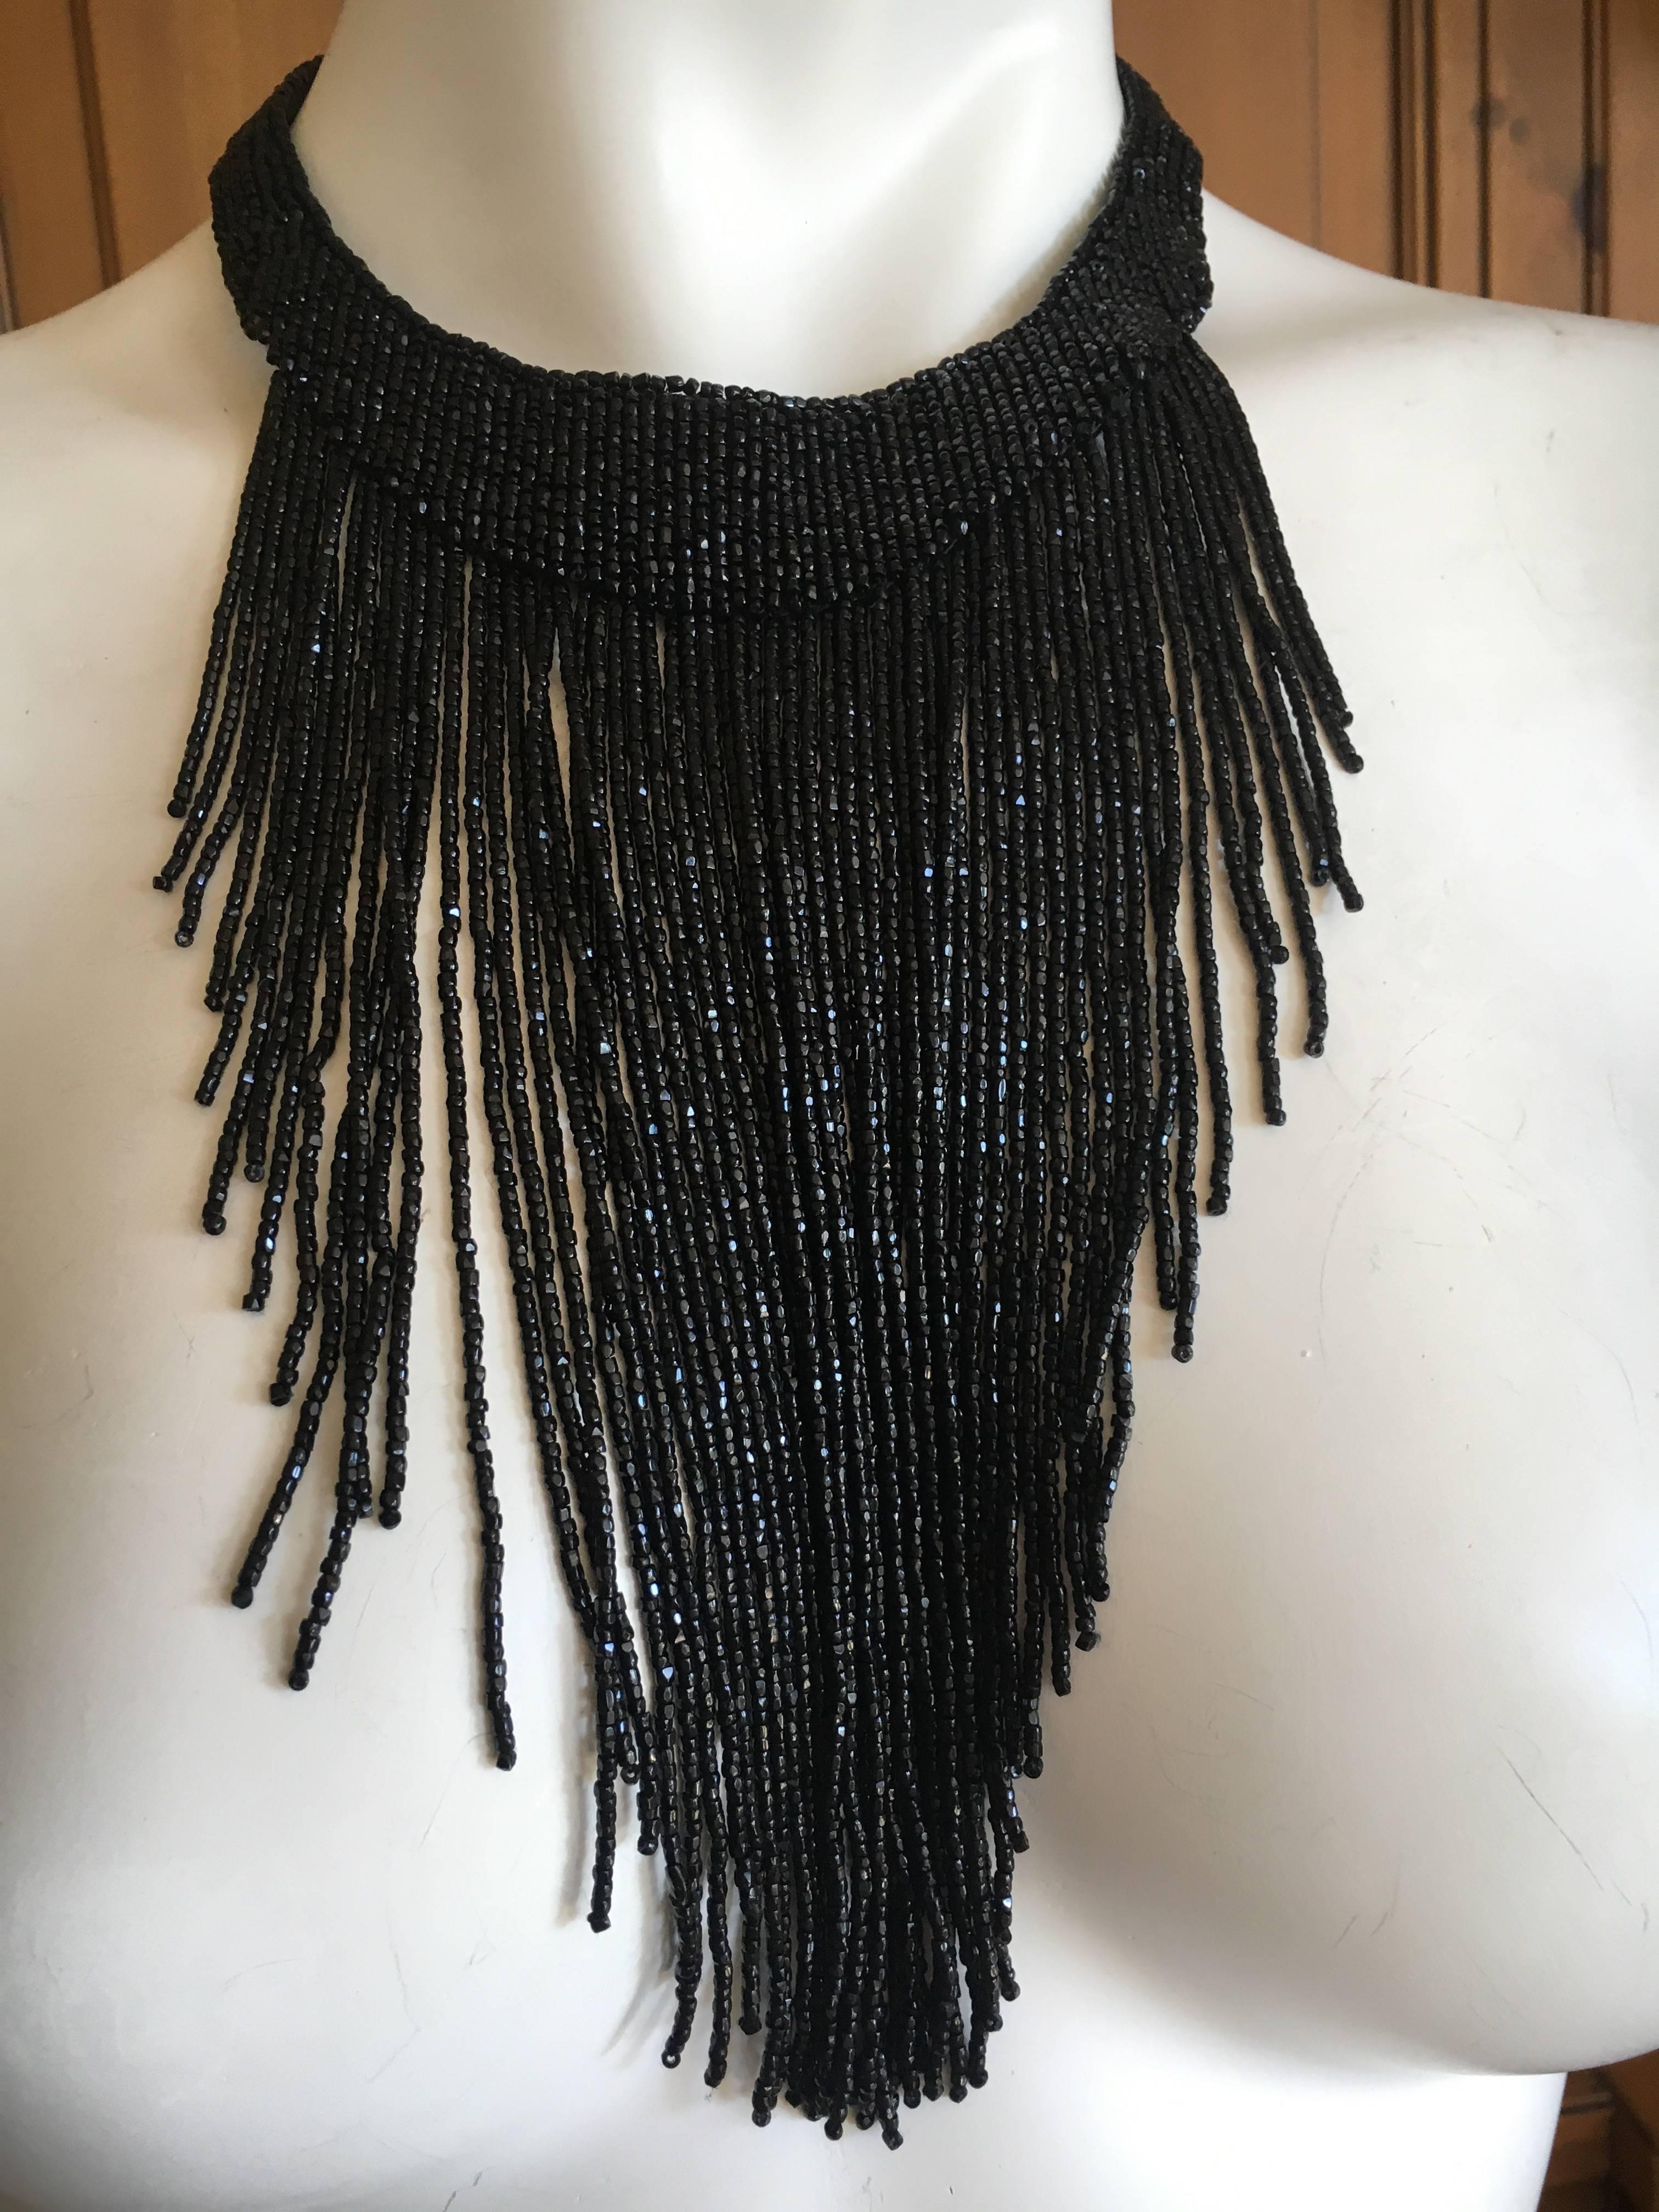 Women's or Men's Christian Dior by John Galliano Outstanding Glass Jet Bead Fringed Bib Necklace